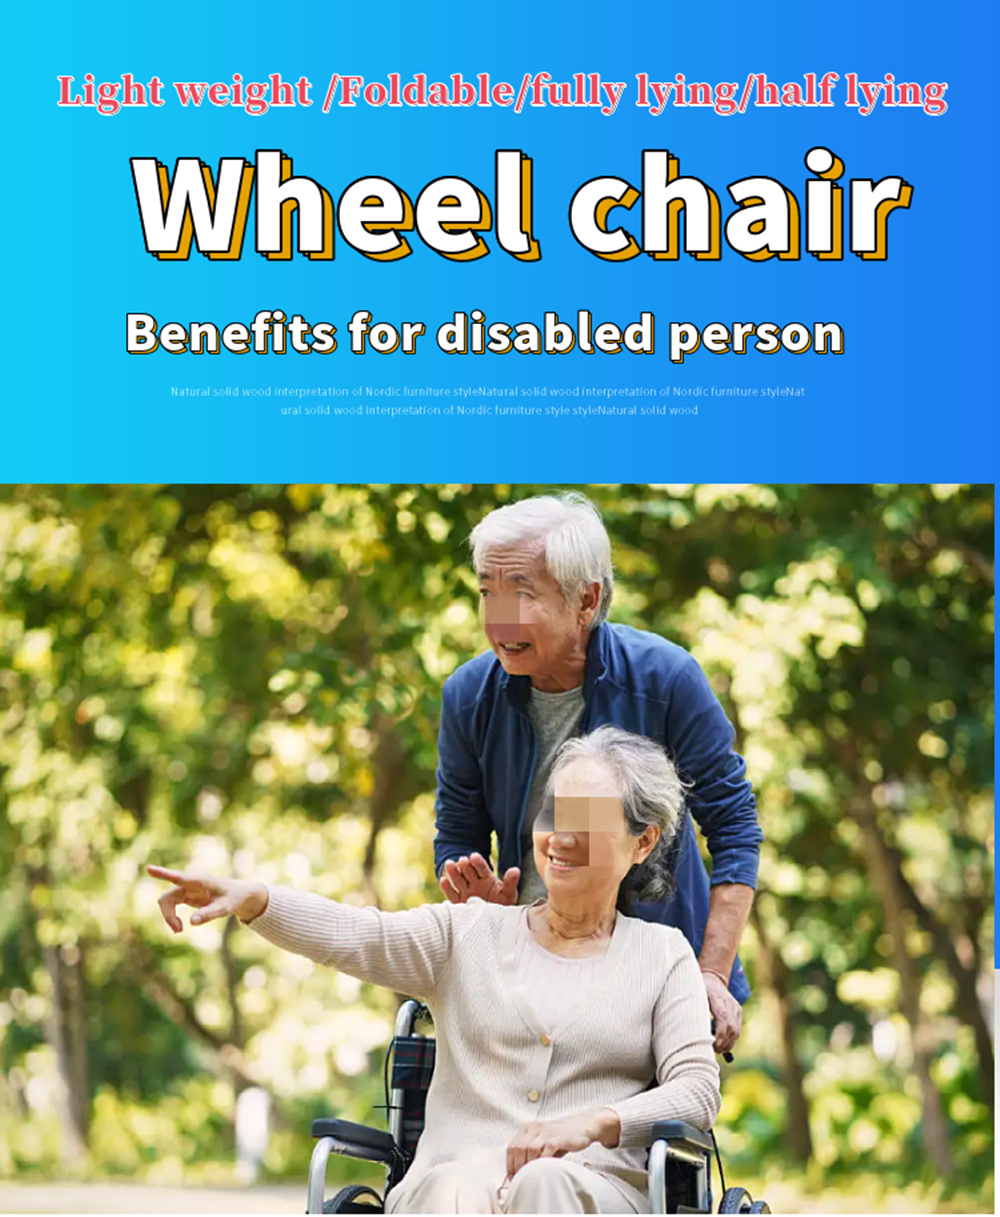 Cerebral Palsy Rehabilitation Equipment Portable Lightweight Folding Reclining Wheel Chair for Patient Child Elderly People